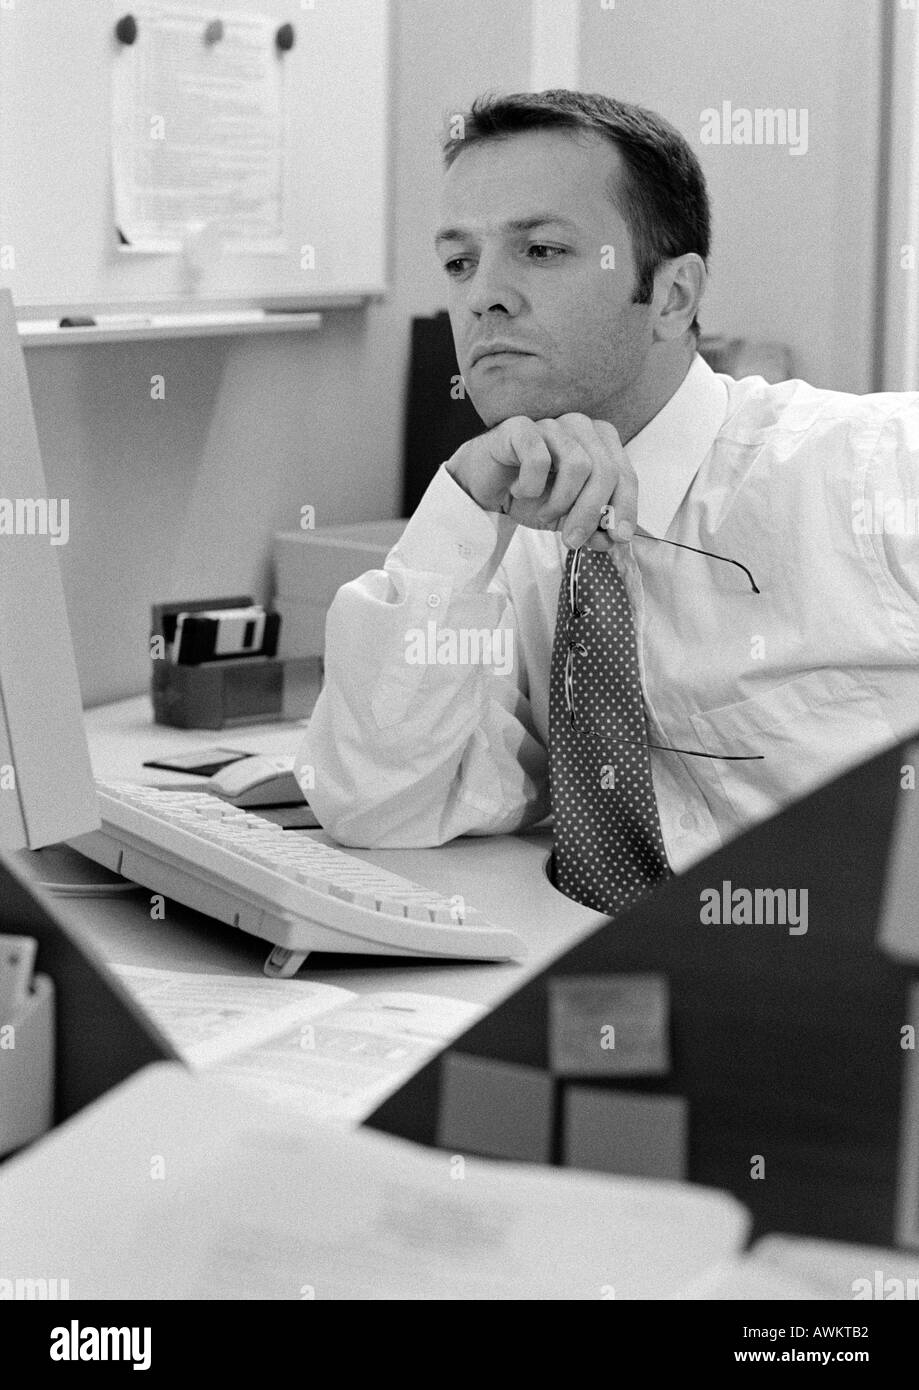 Man sitting at desk, elbow on table, b&w Stock Photo